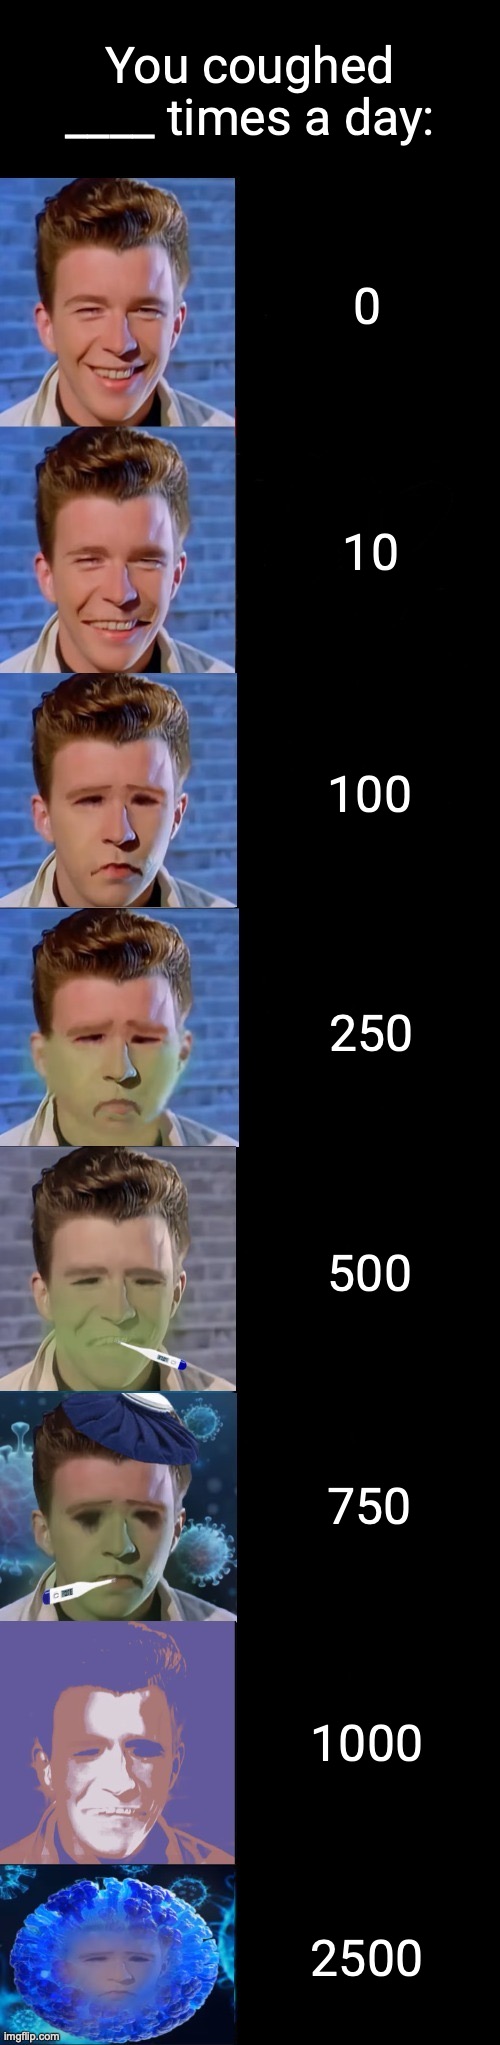 Rick Astley Becoming Sick |  You coughed ____ times a day:; 10; 100; 250; 500; 750; 1000; 2500 | image tagged in rick astley becoming sick,sick,vomits,rick astley | made w/ Imgflip meme maker